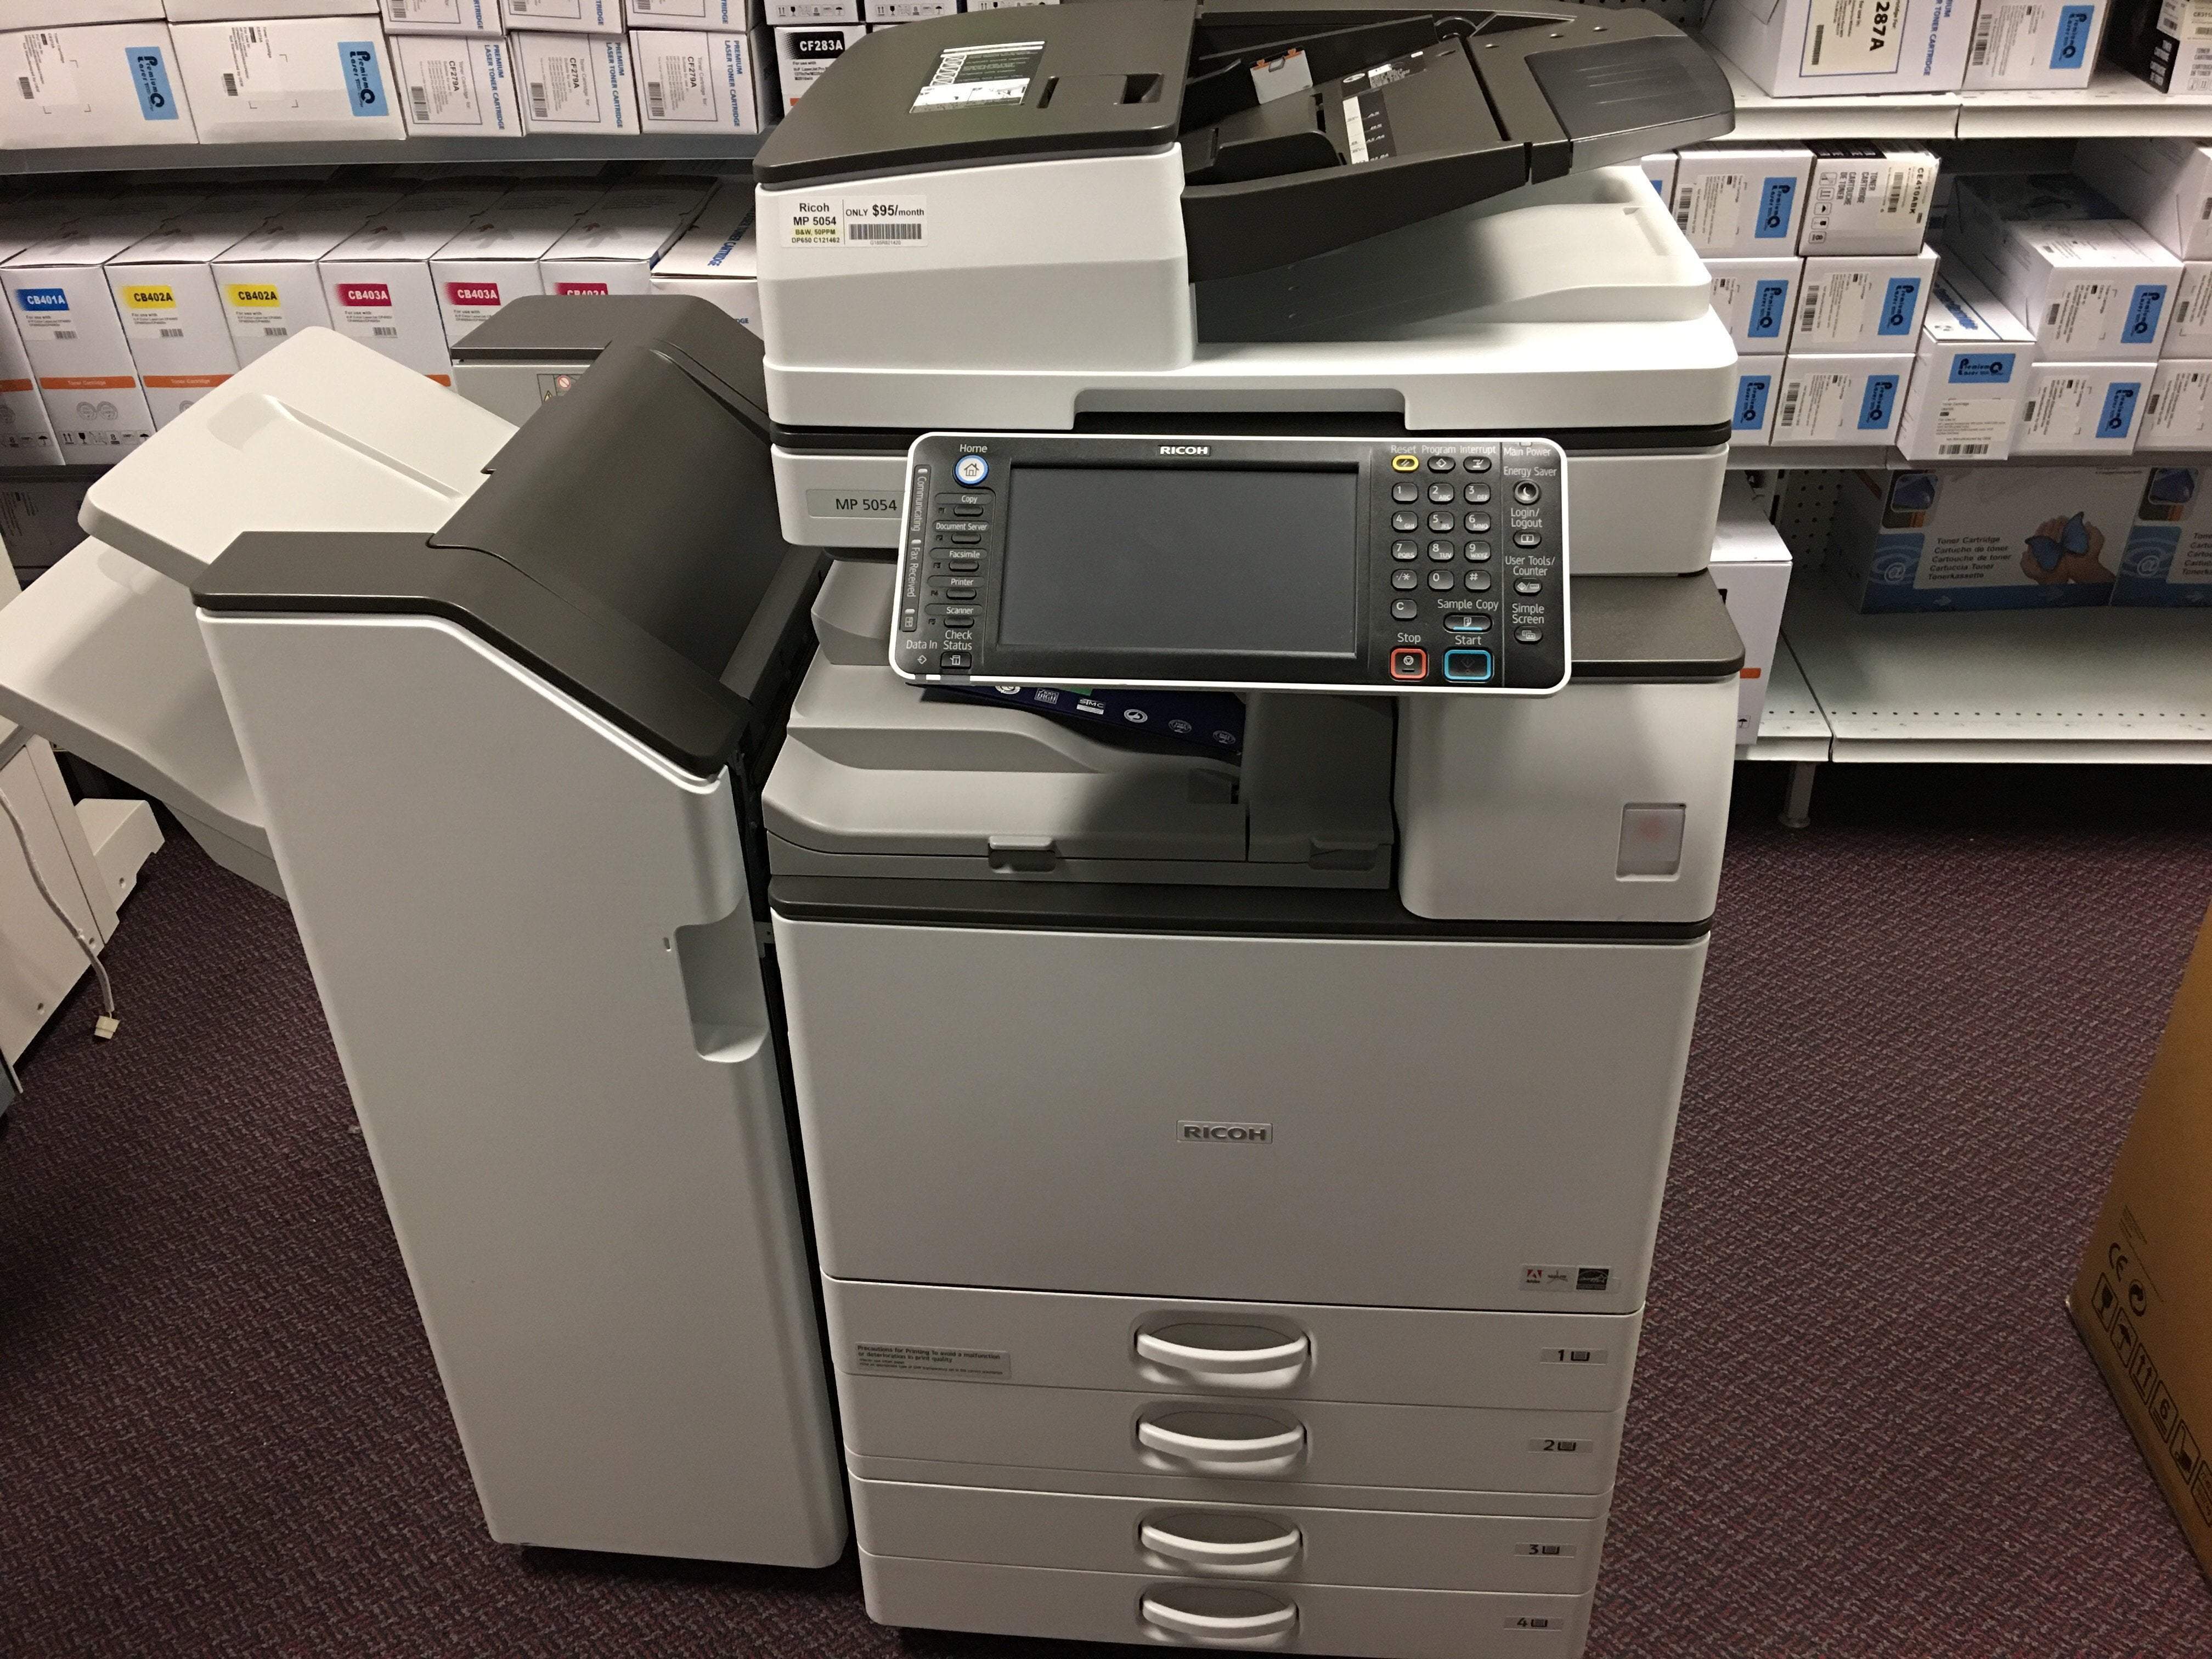 Absolute Toner $76/Month Ricoh MP 5054 with Only 9K Page count Black and White Laser Multifunction Printer Copier Scanner Showroom Monochrome Copiers